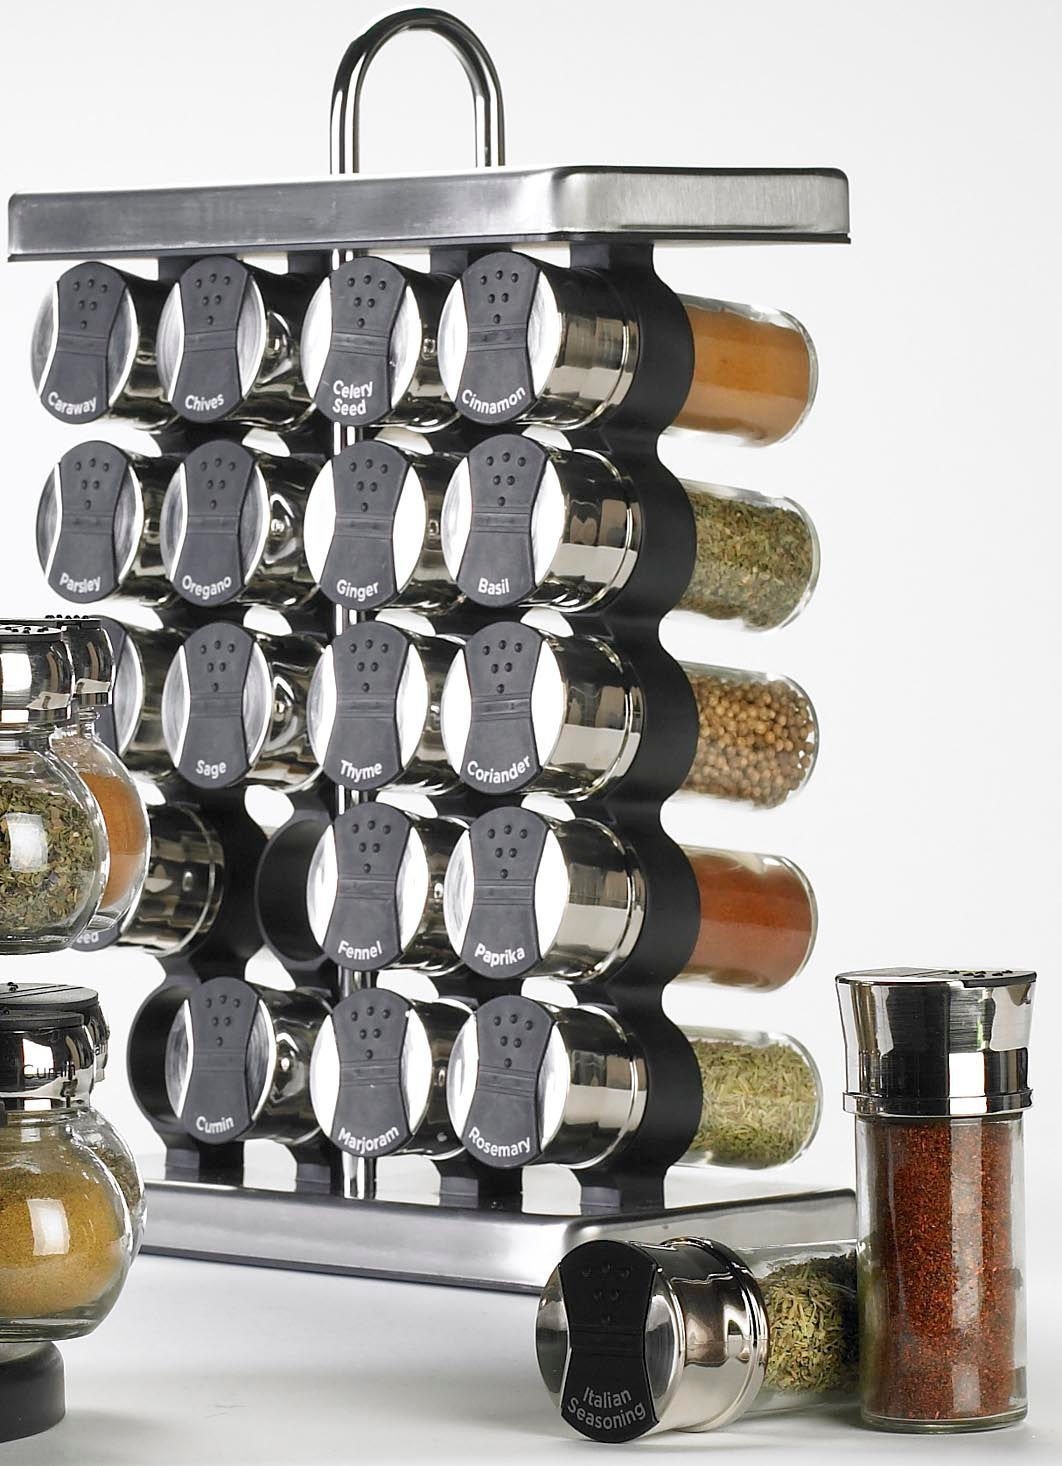 Stainless spice rack